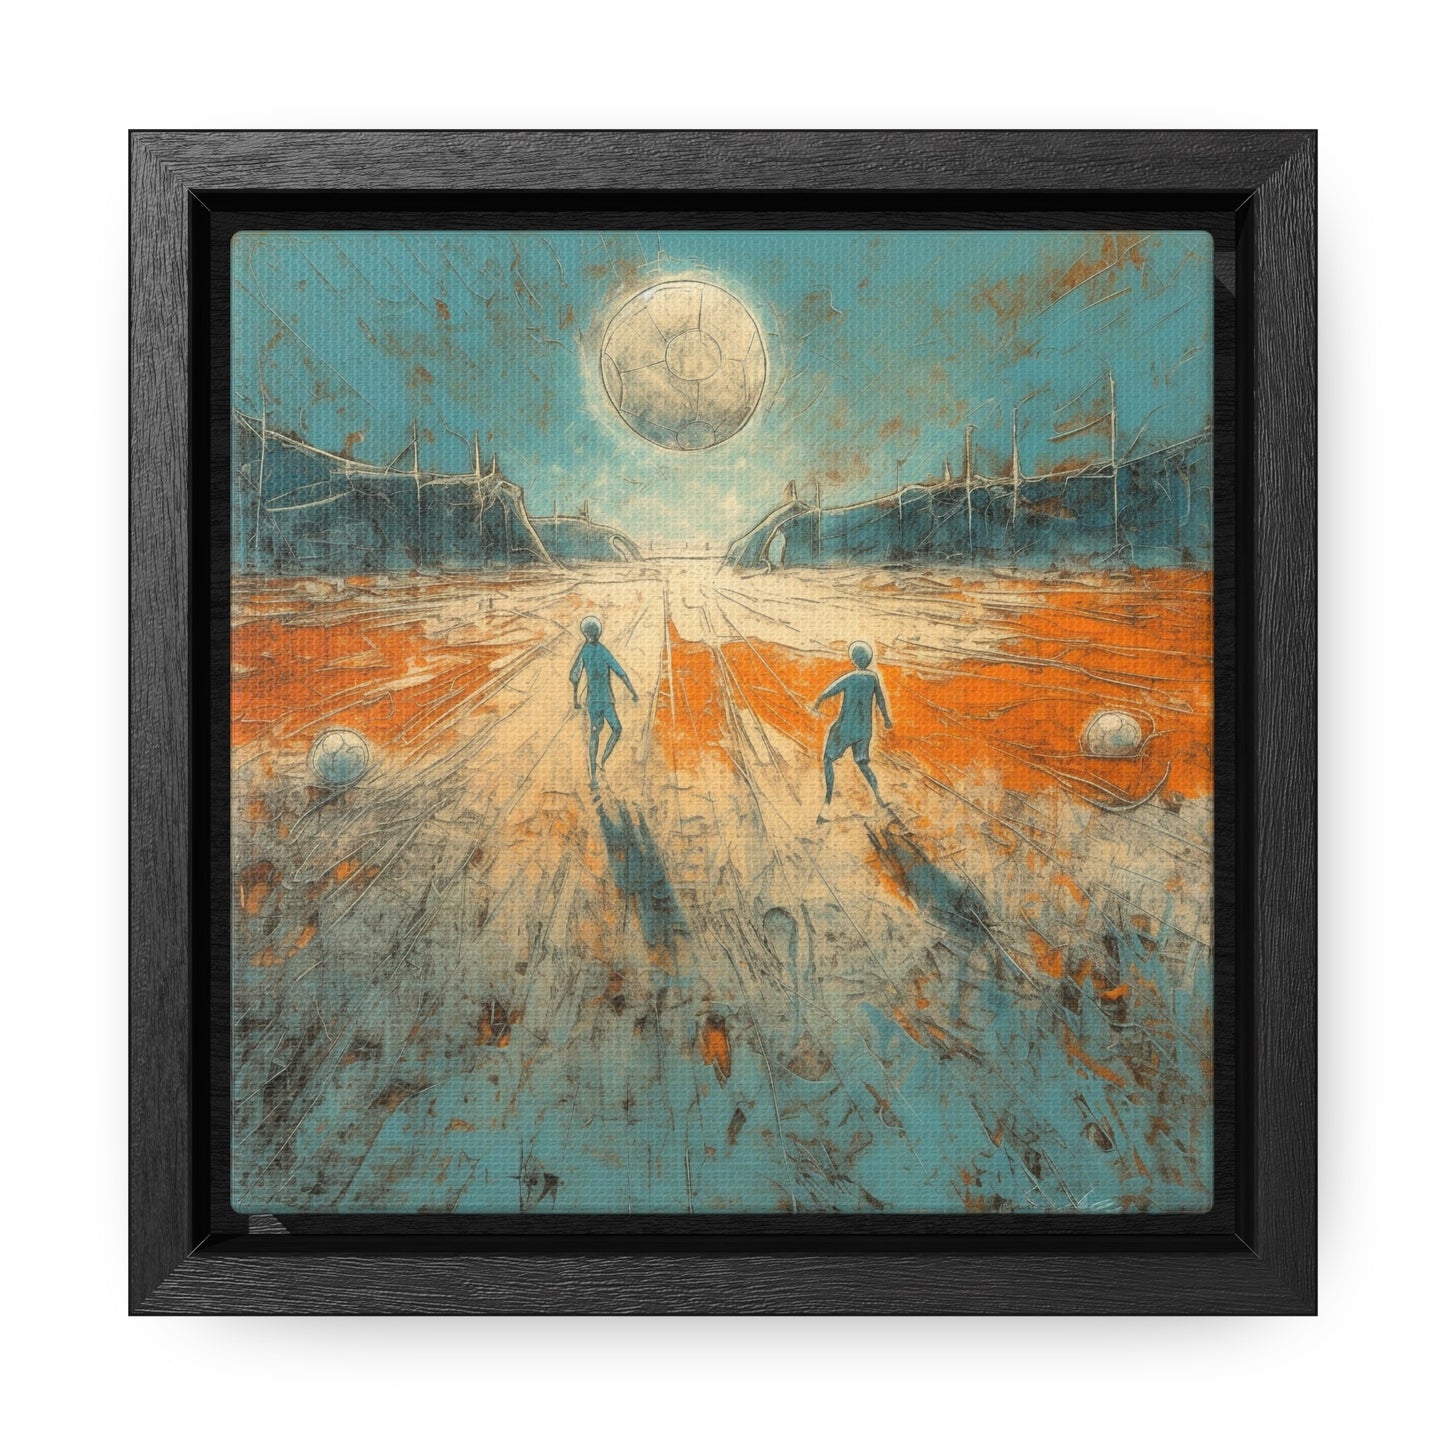 Childhood 20, Gallery Canvas Wraps, Square Frame